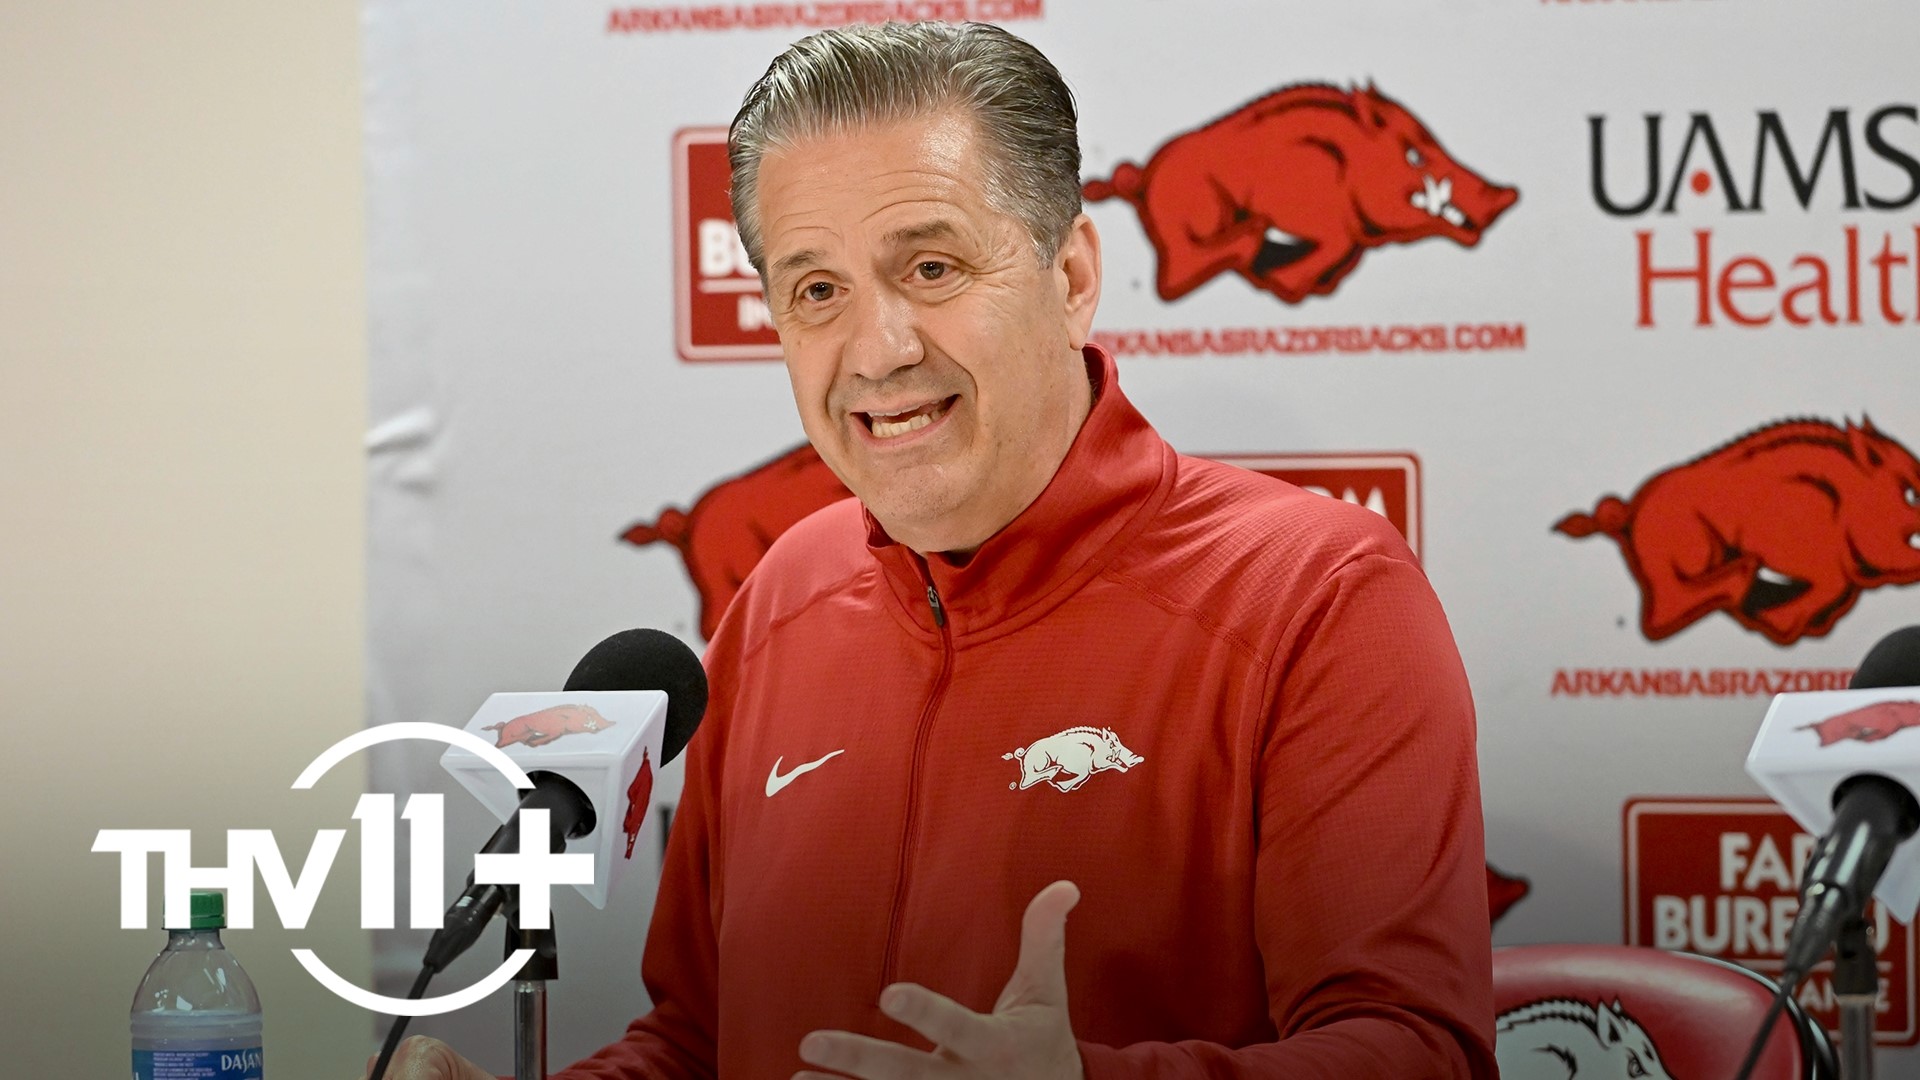 New Arkansas Razorback head coach John Calipari answered questions on Wednesday in his first press conference in Fayetteville.